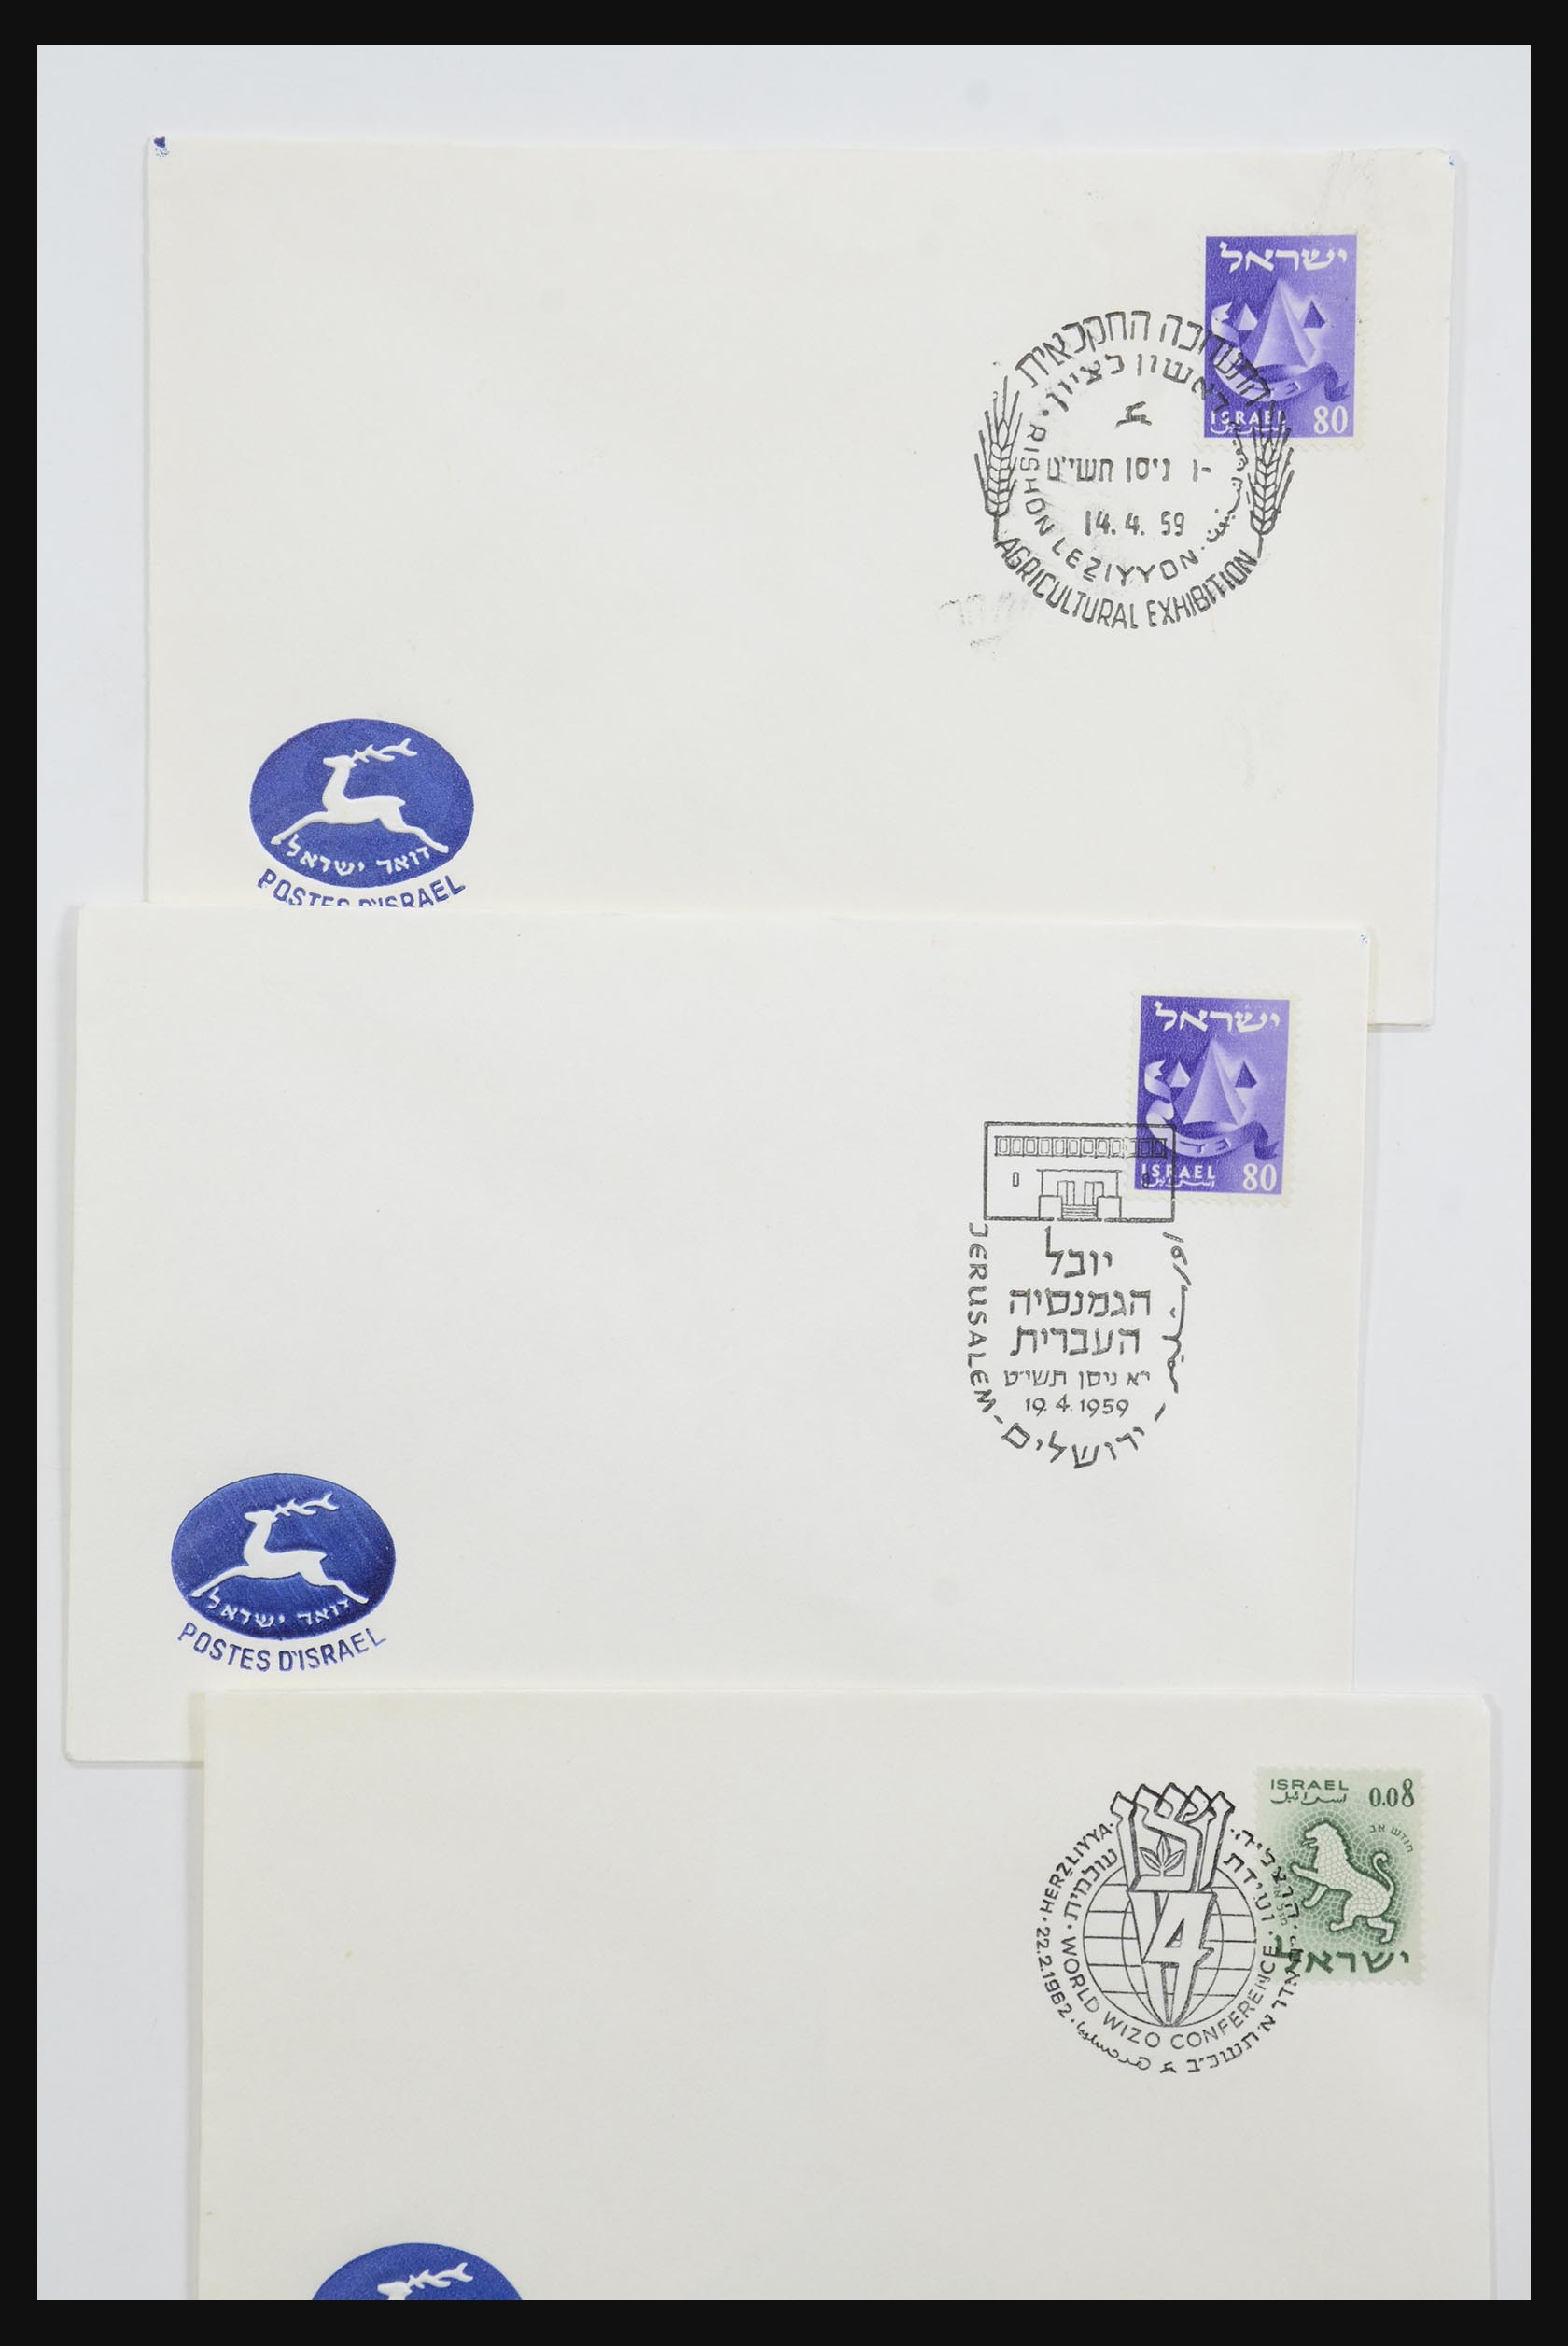 31924 041 - 31924 Israel first day cover collection 1957-2003.